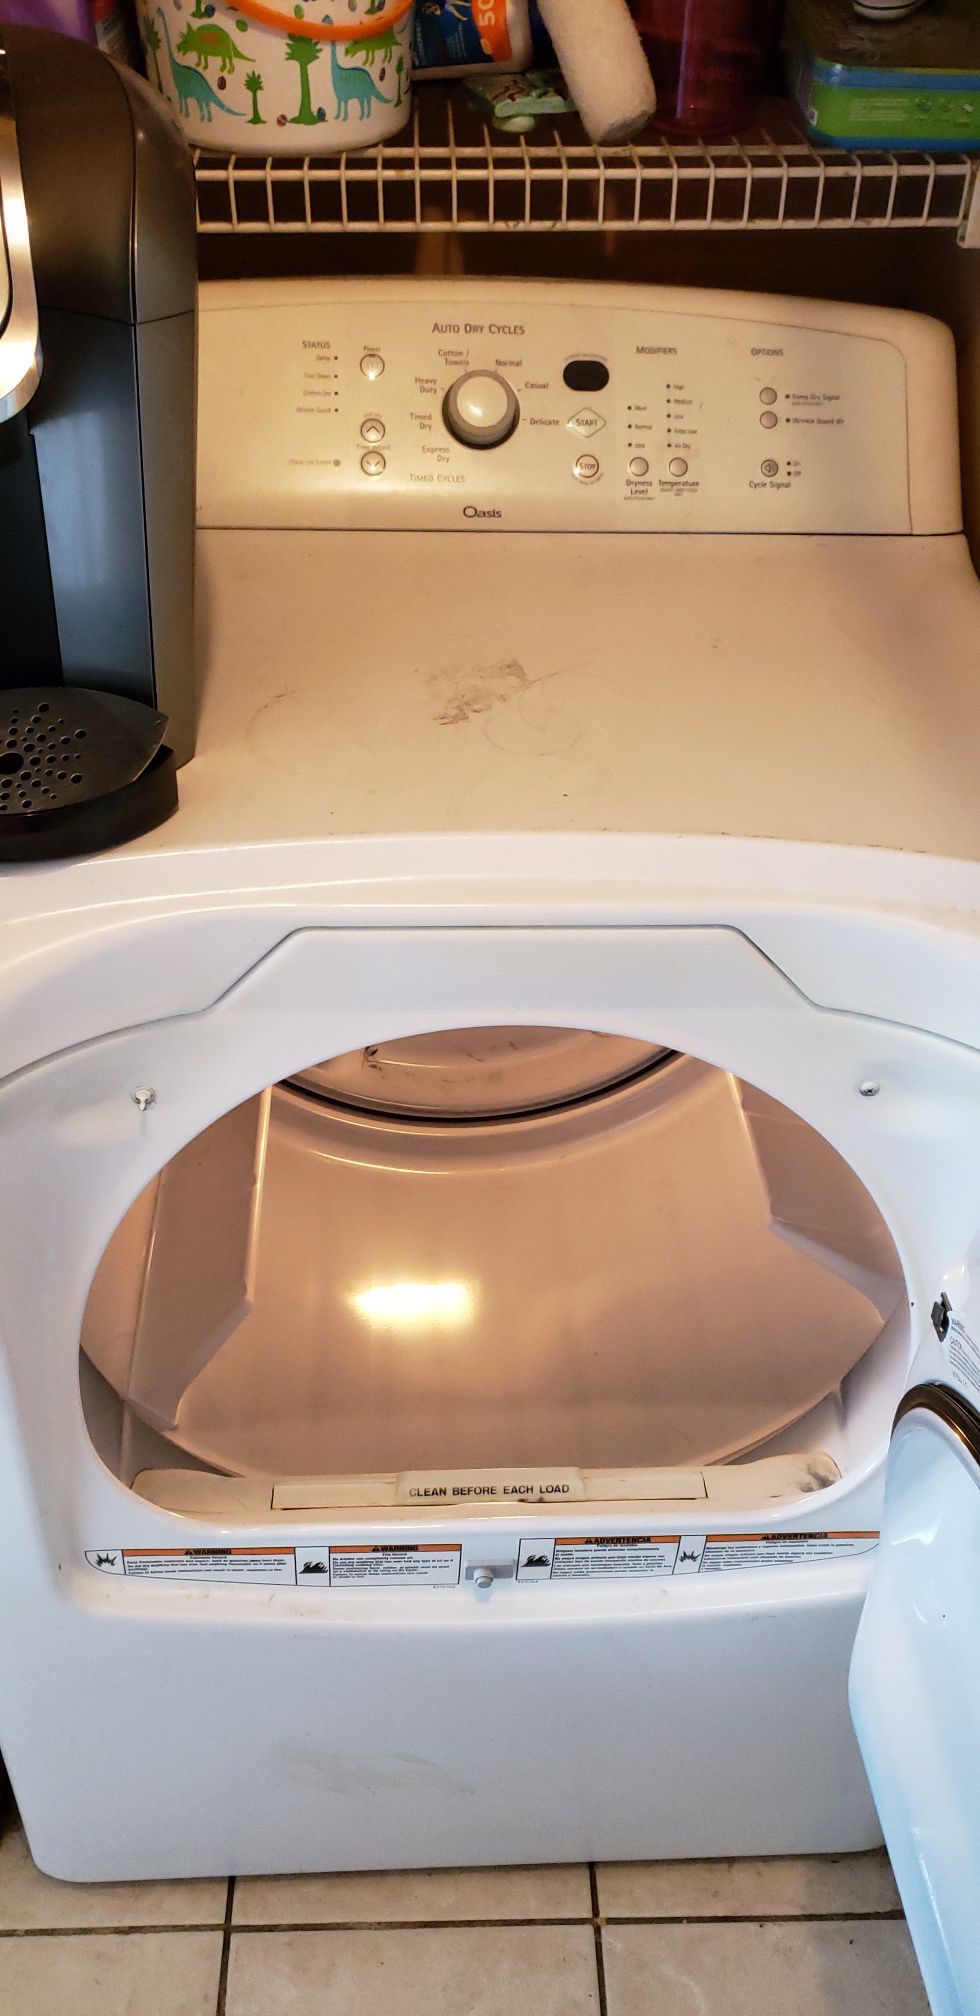 Kenmore and Oasis washer and dryer